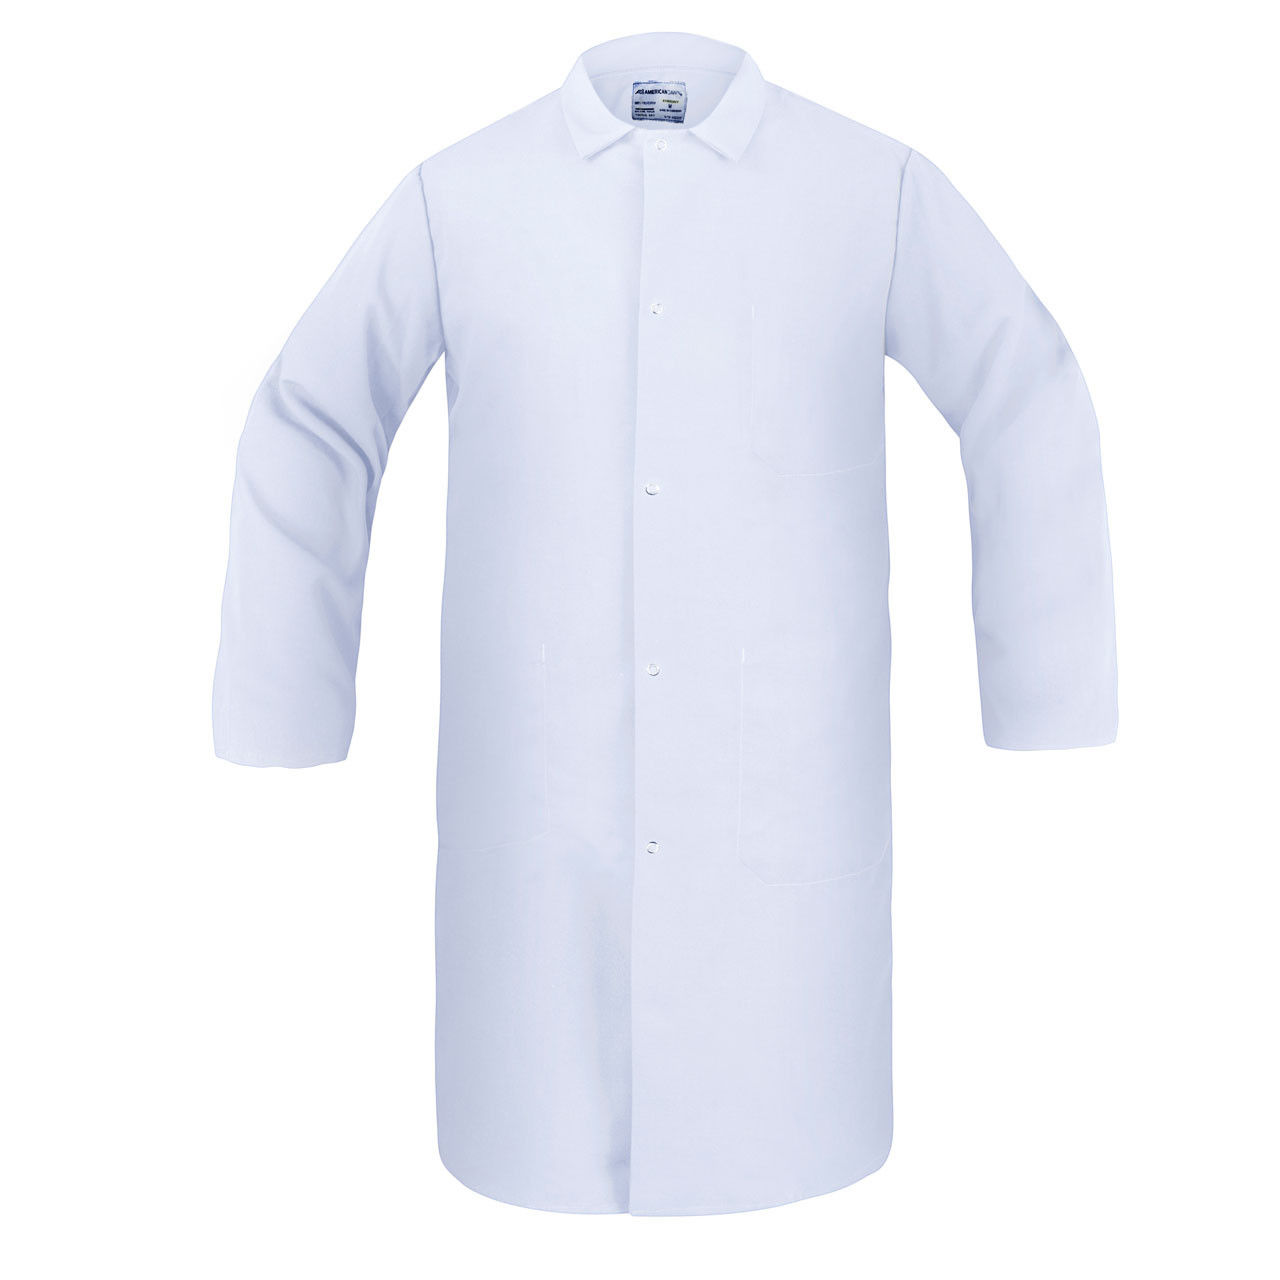 Does the white butcher frock fit a 54-57 hip size?